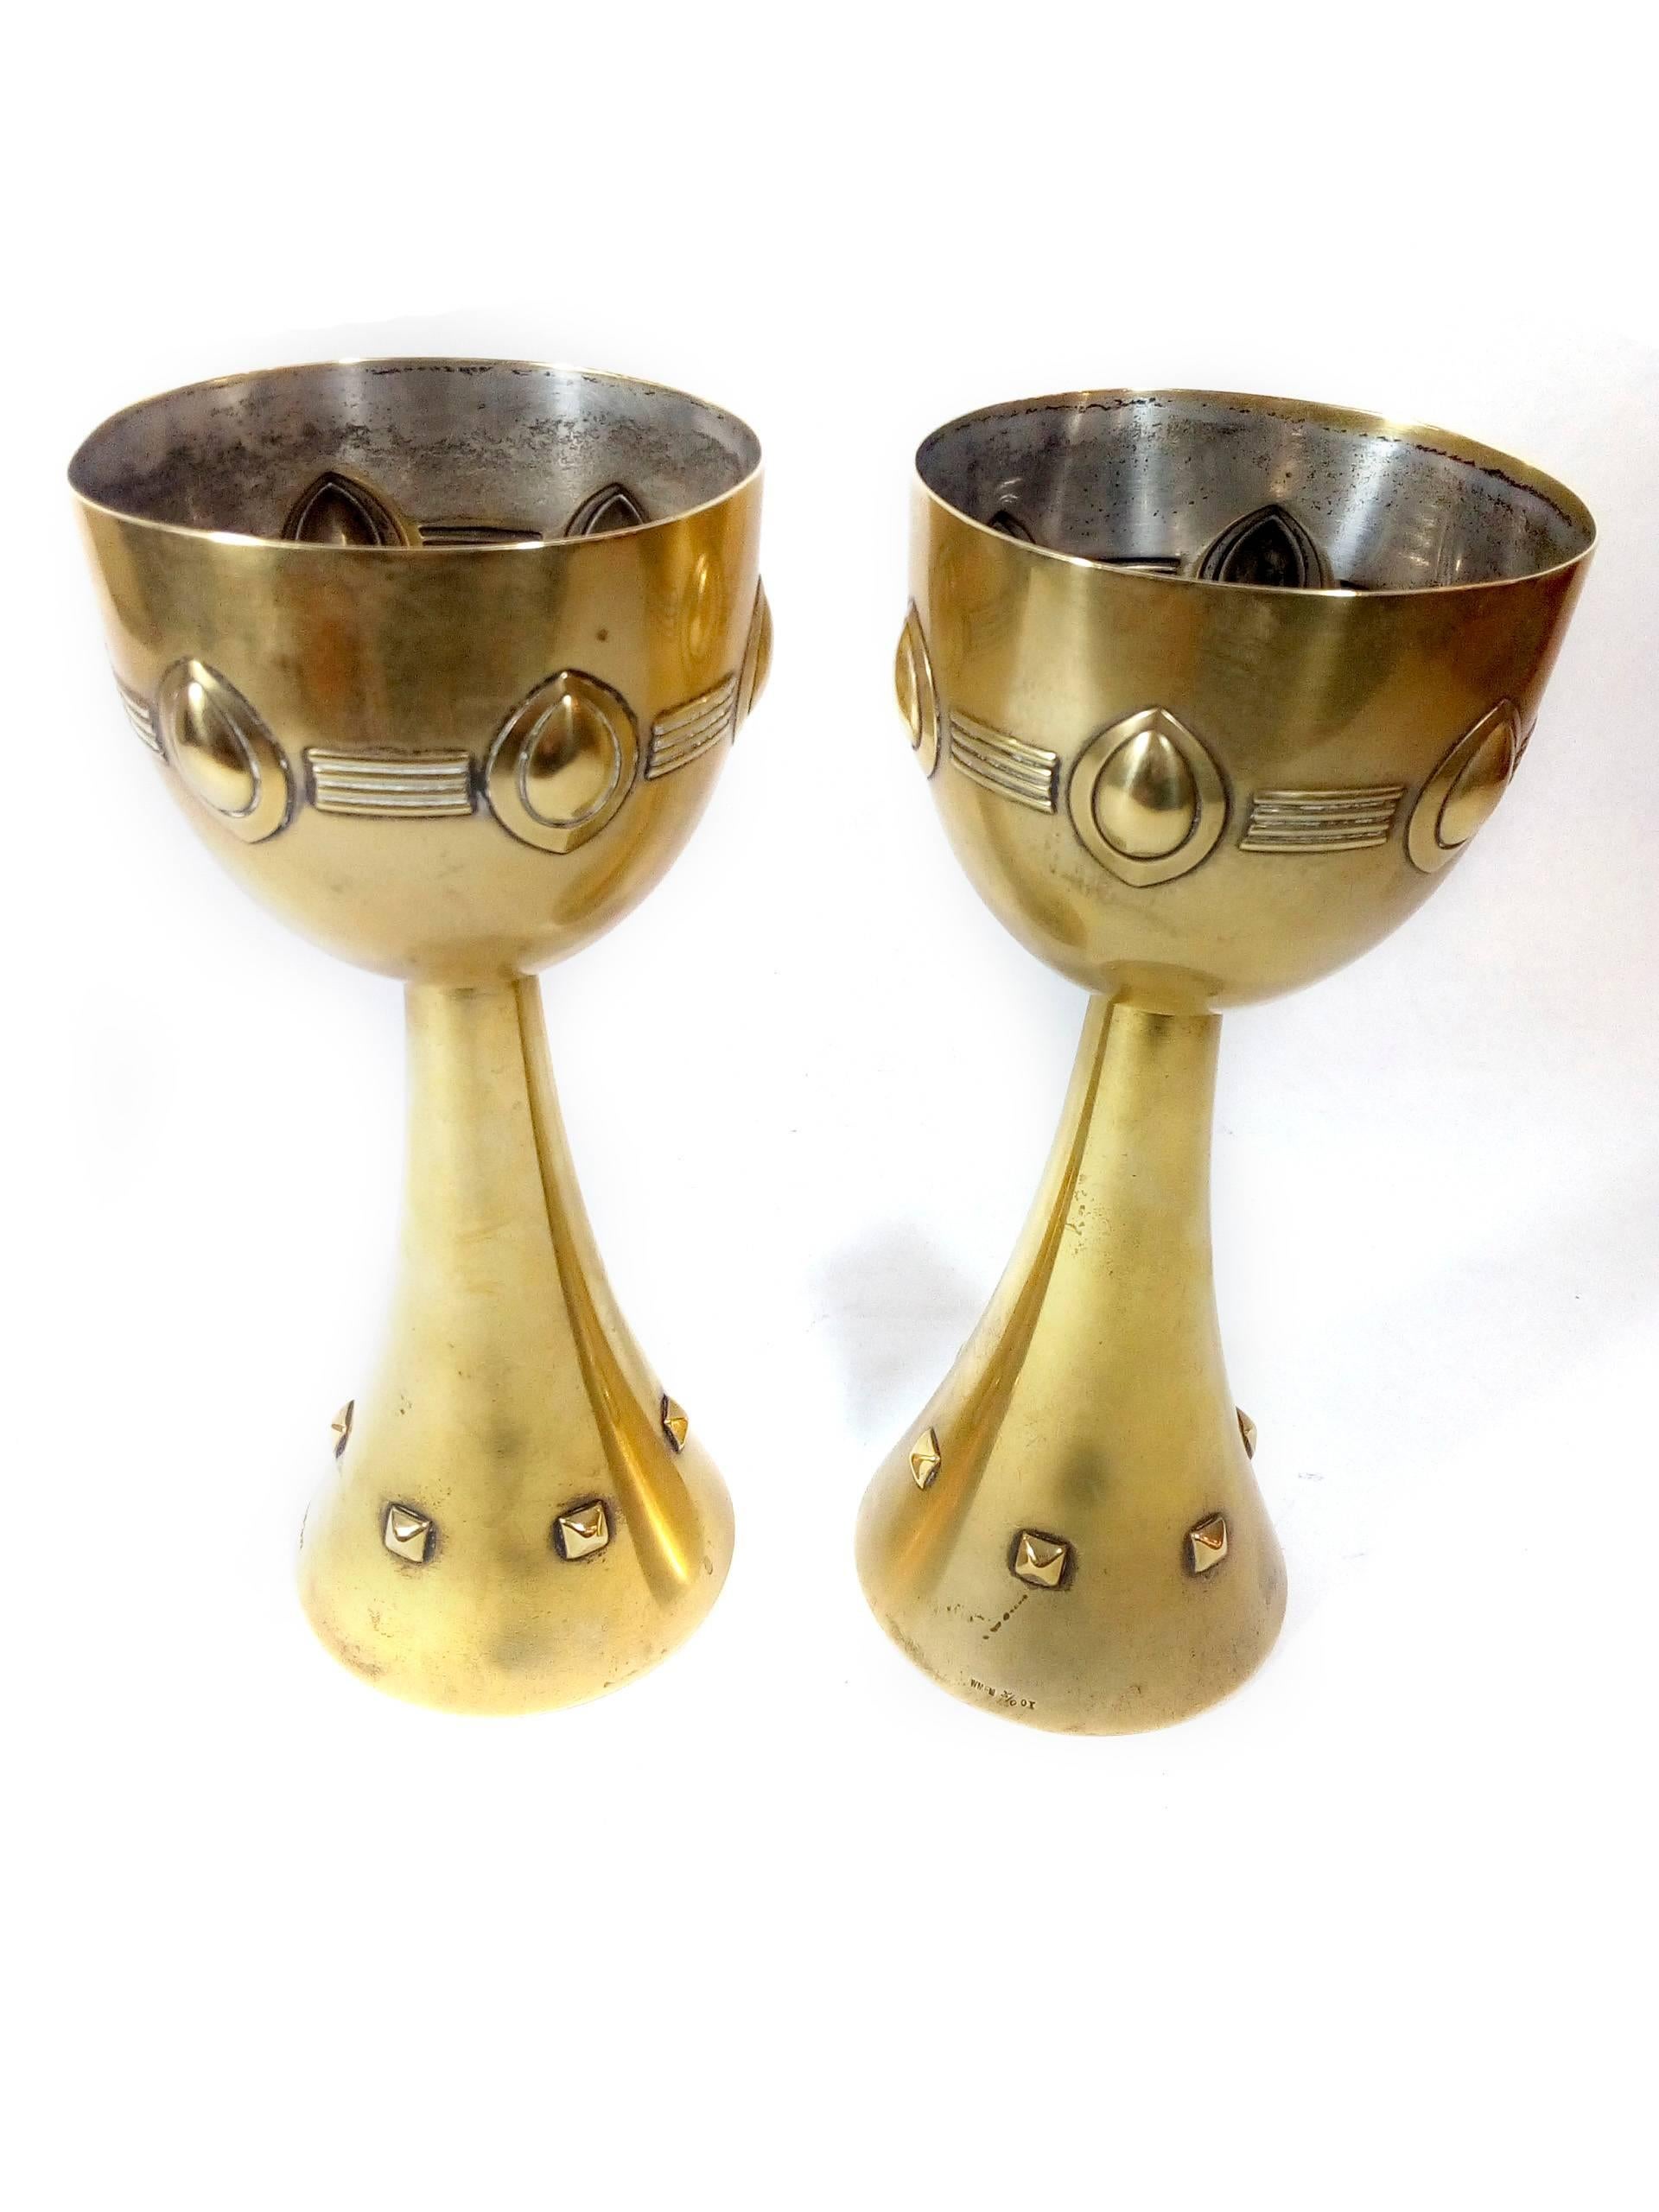 Bronzed Pair of Art Nouveau Goblets by Albin Muller